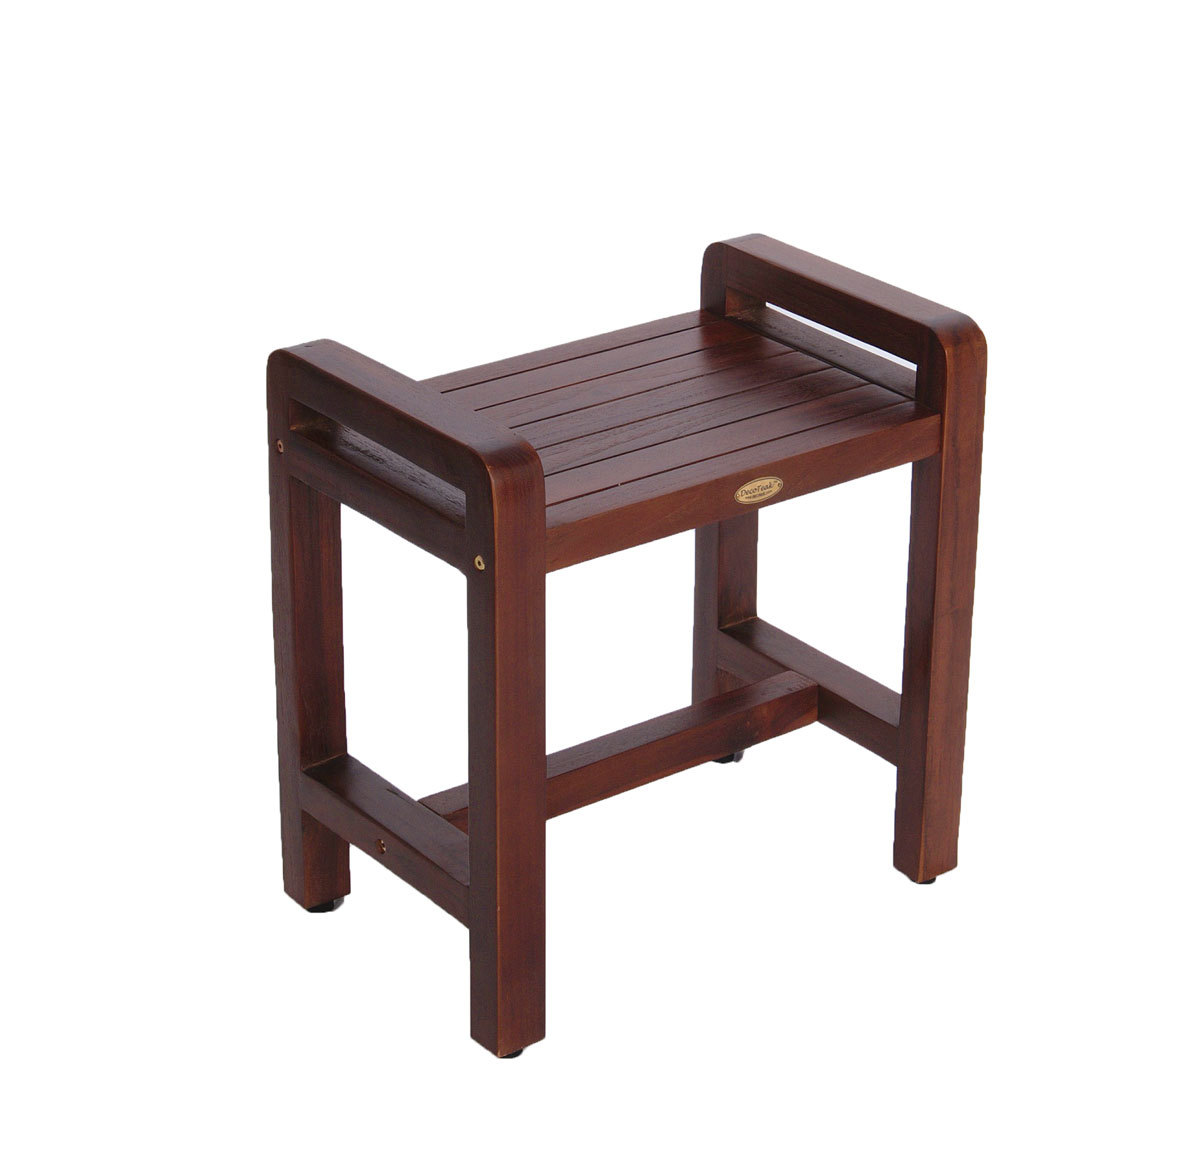 DT107 18" Classic Teak Shower Stool with Arms